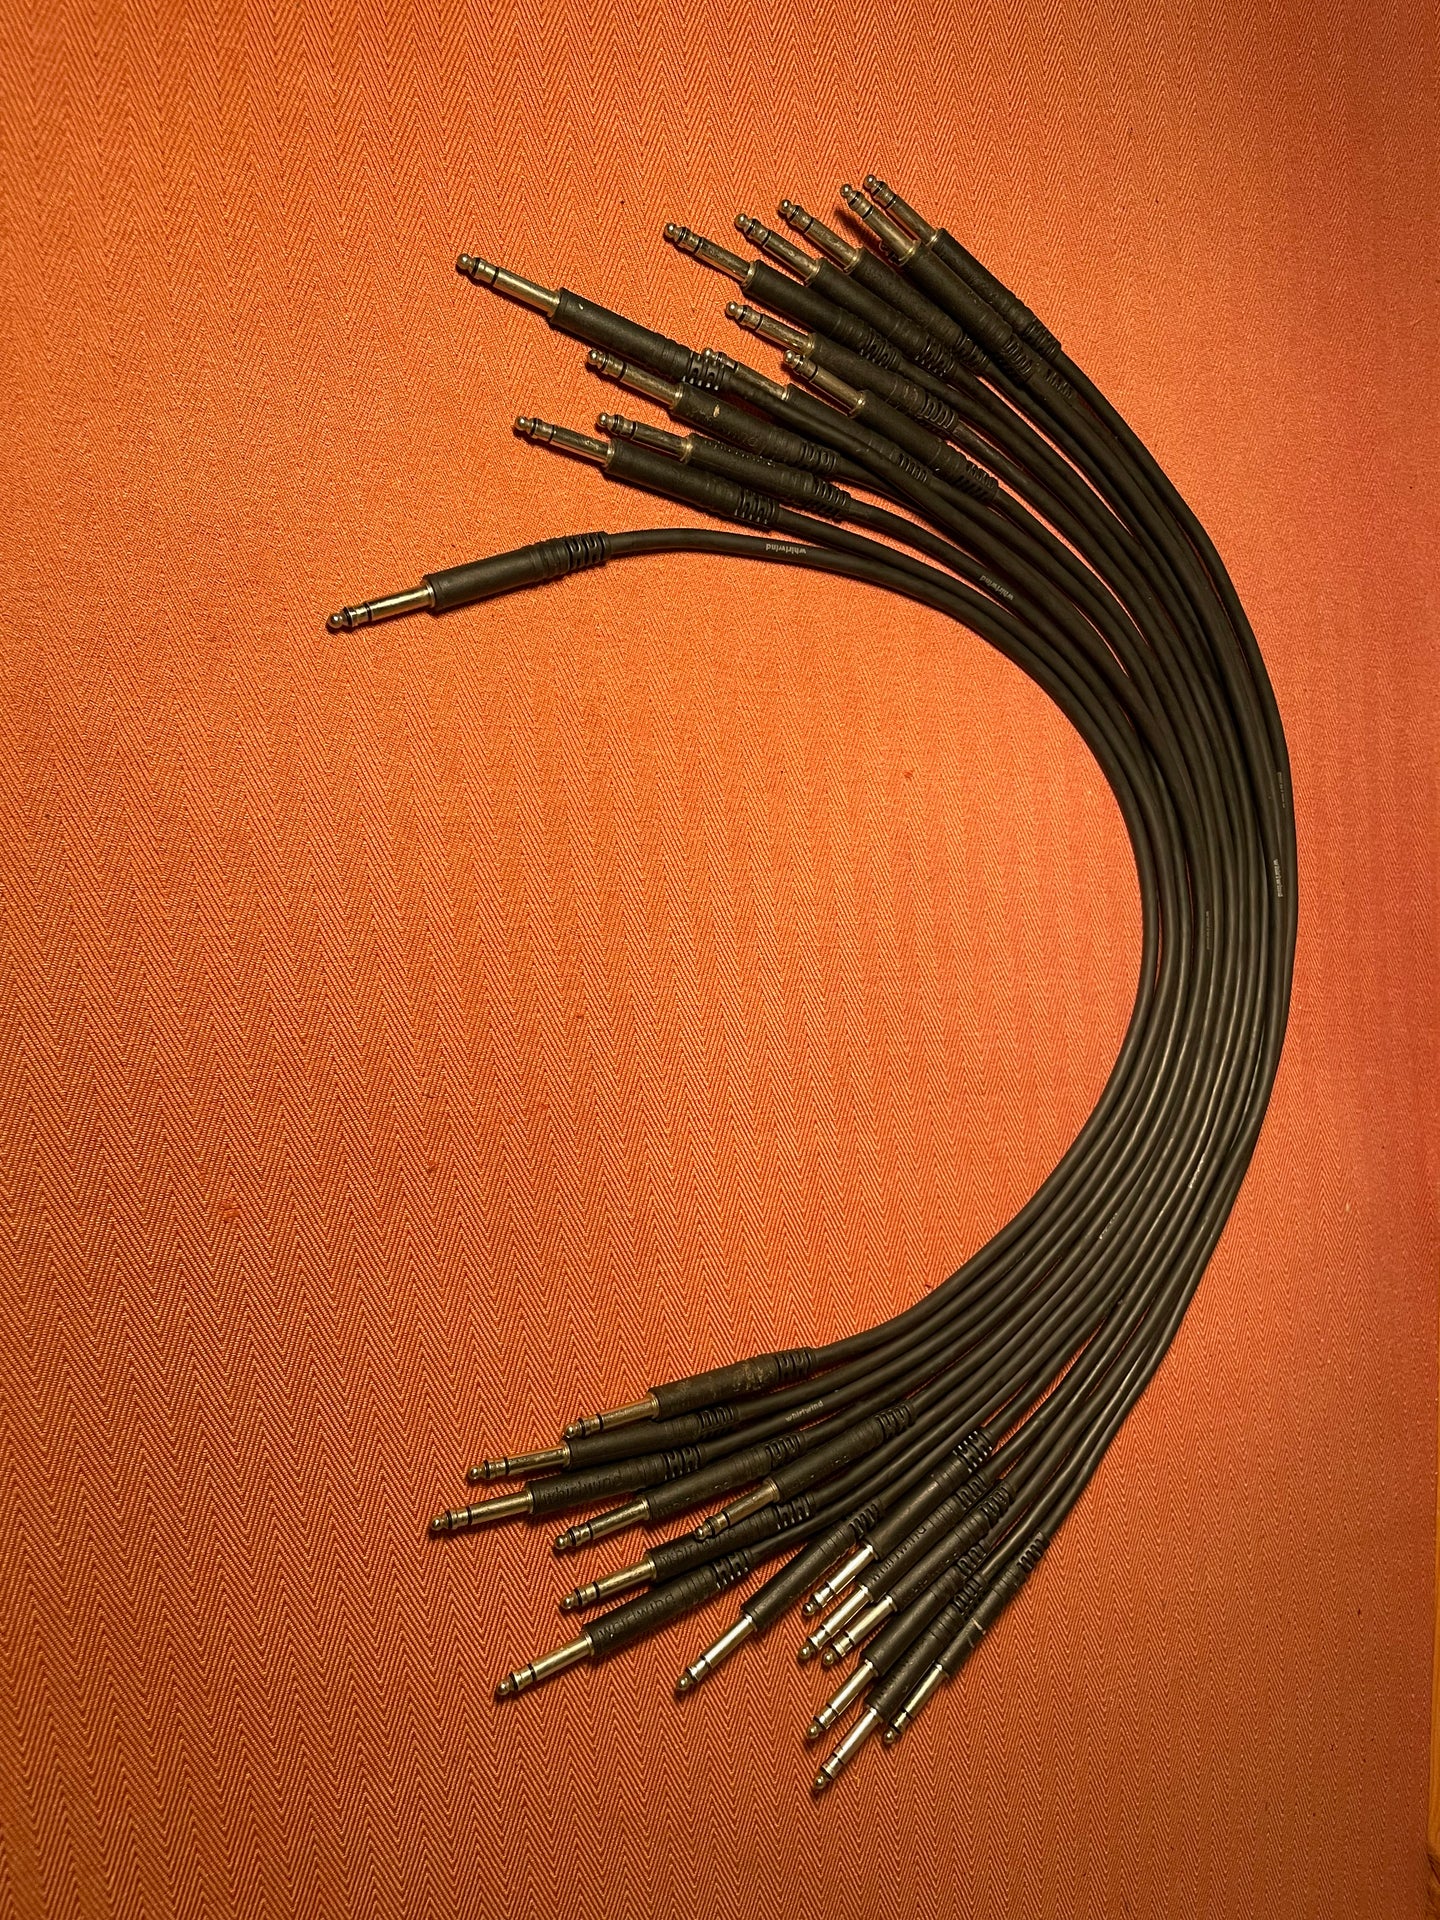 Whirlwind TT Patch Cables (14)